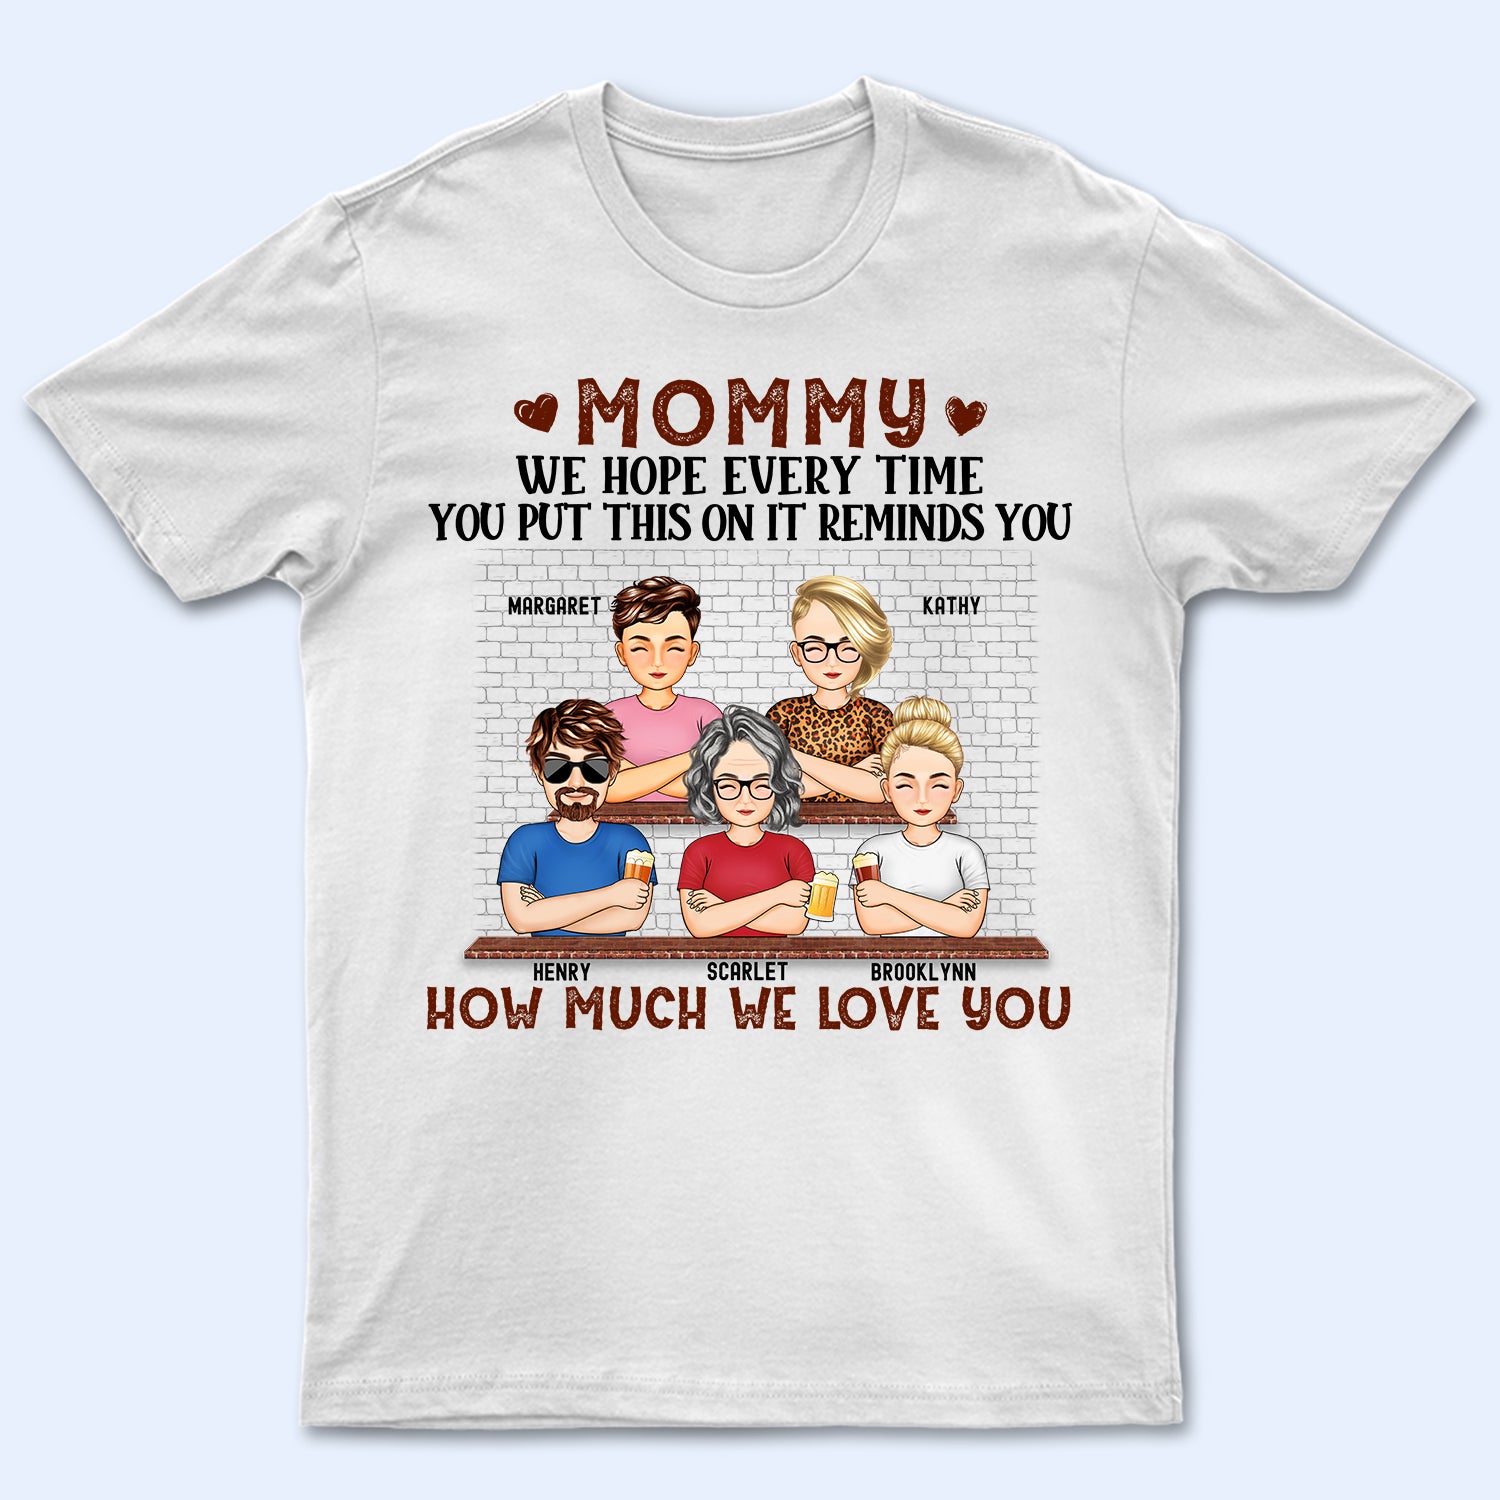 We Hope Every Time You Put This - Birthday, Loving Gift For Mommy, Mother, Grandma, Grandmother - Personalized Custom T Shirt